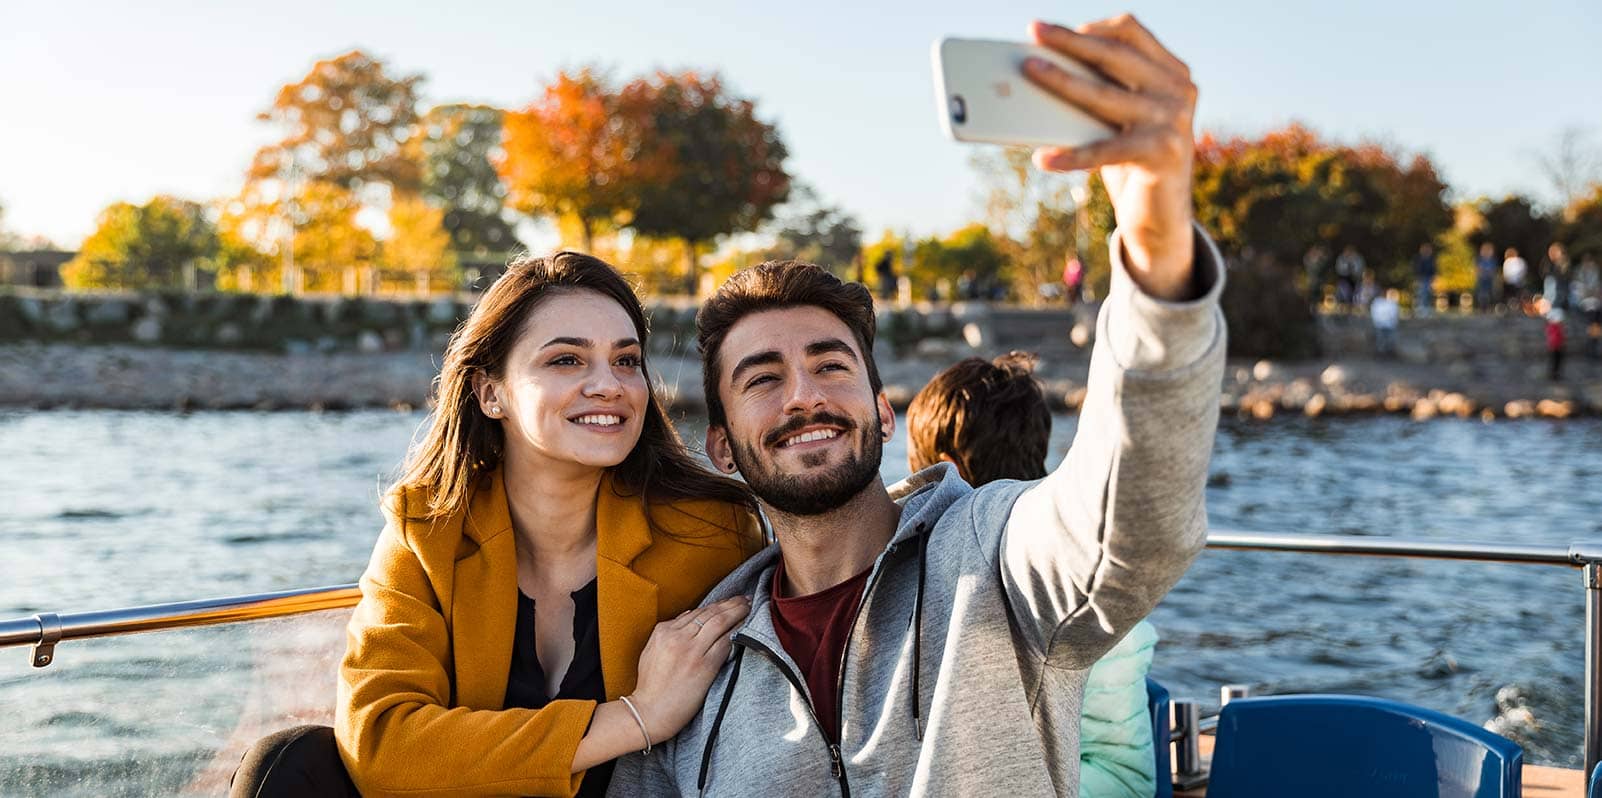 Man and a woman taking a selfie on the HOHO boat in Copenhagen with the water and trees on the background